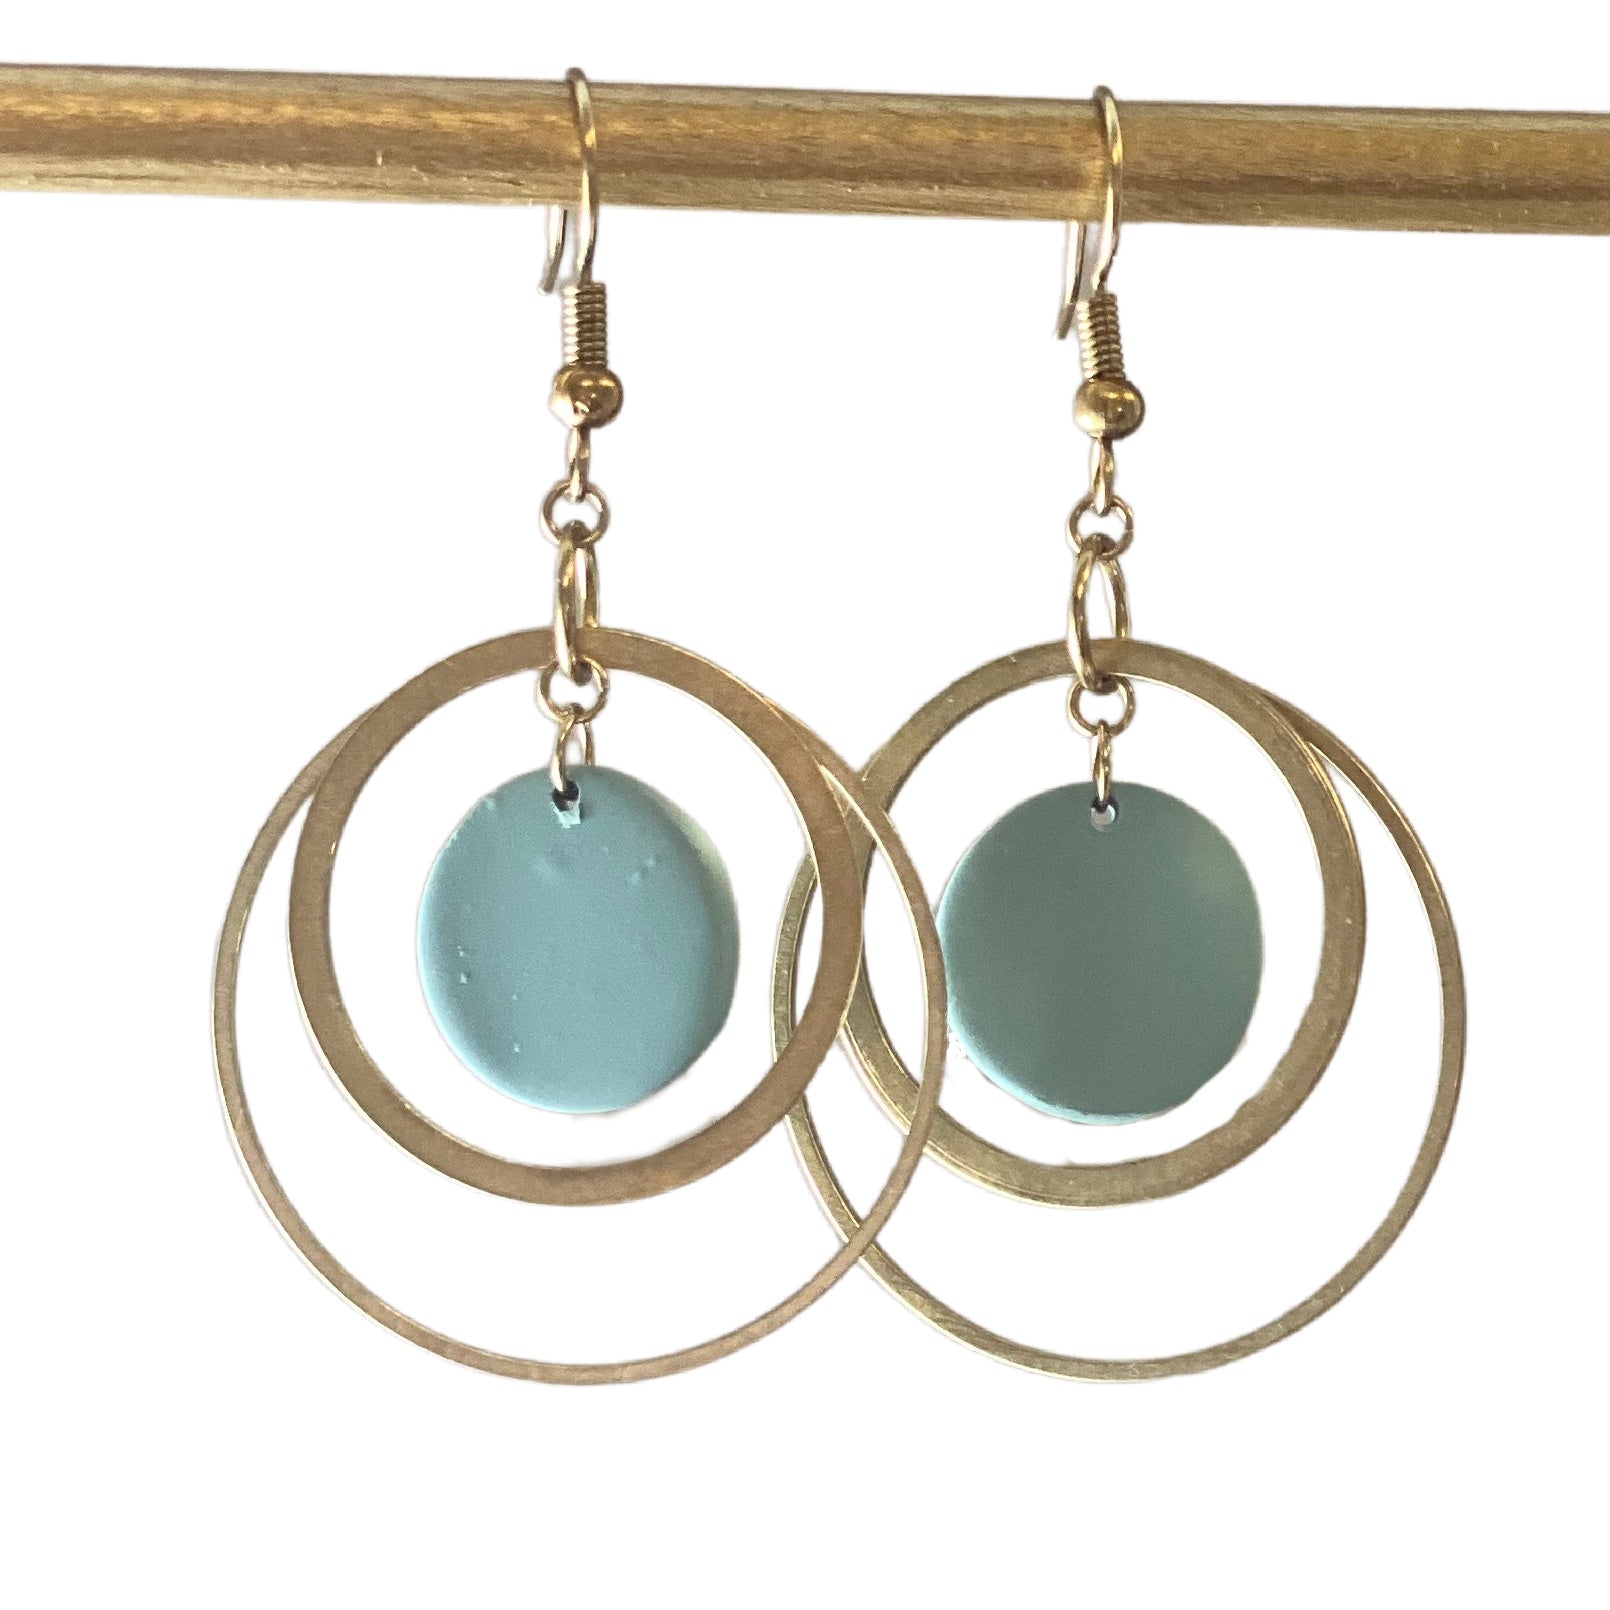 Mint Green and Brass Circle Earrings